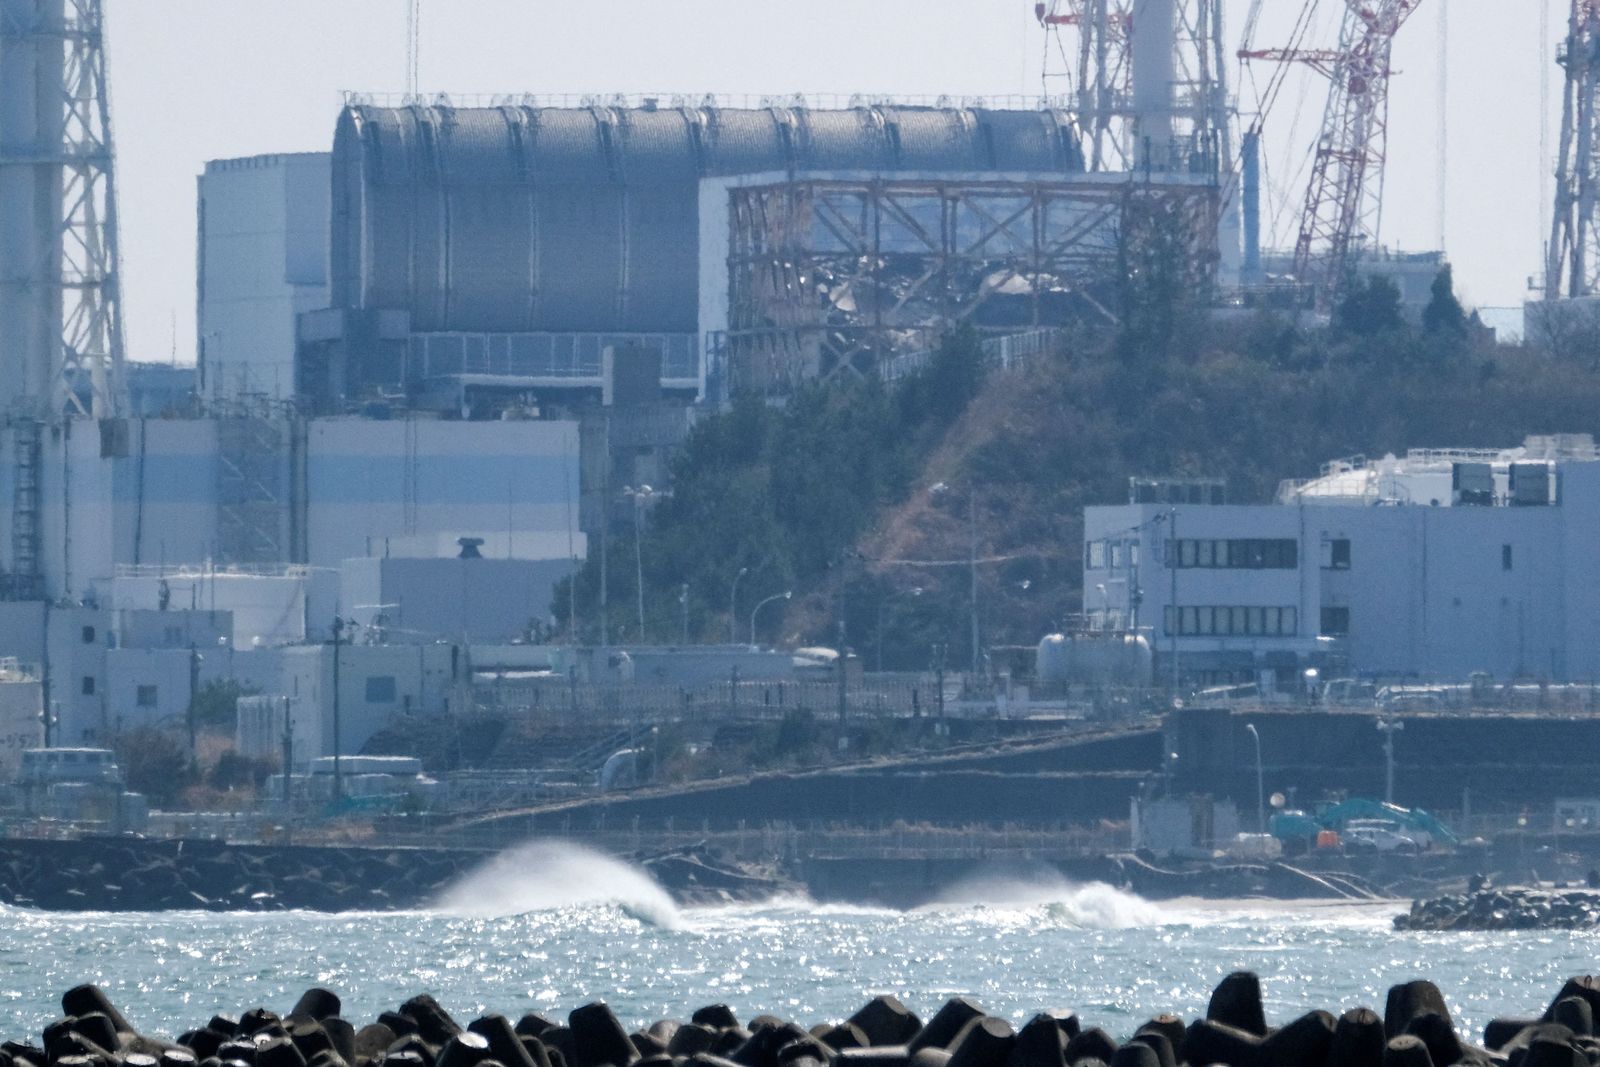 (FILES) This file photo taken on March 10, 2021 along the coast of Futaba in Fukushima prefecture shows the Tokyo Electric Power Company Holdings' (TEPCO) Fukushima Daiichi nuclear power plant (top). - The International Atomic Energy Agency said on February 18, 2022 it has made 